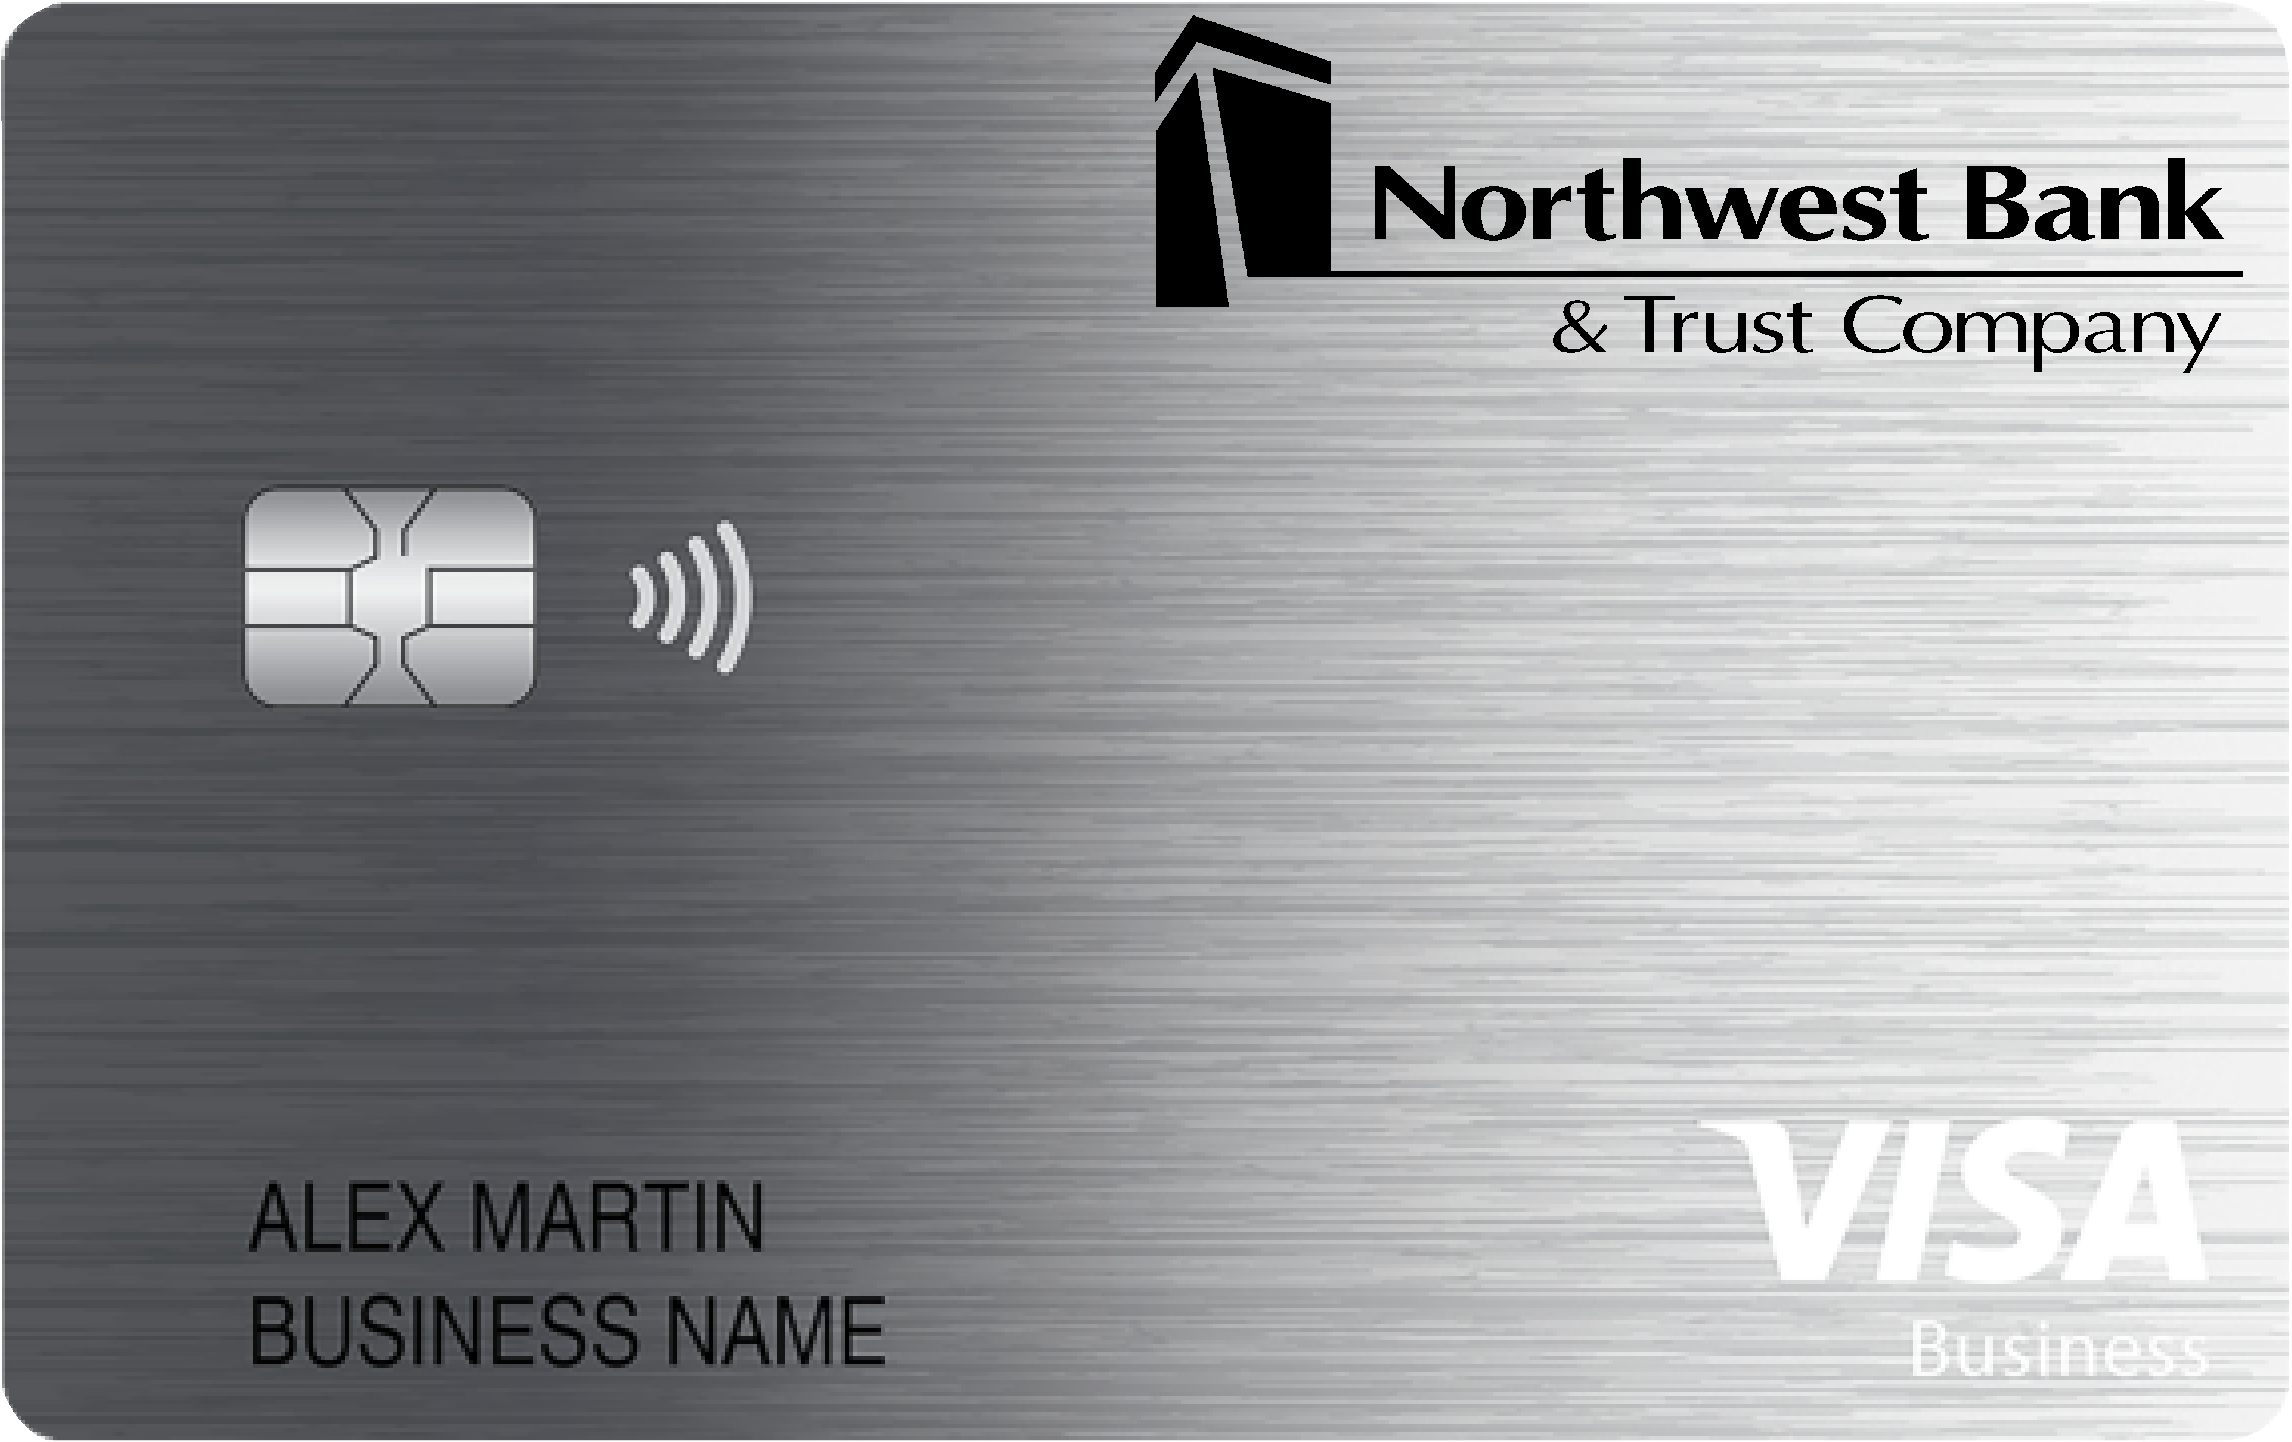 Northwest Bank & Trust Company Business Card Card